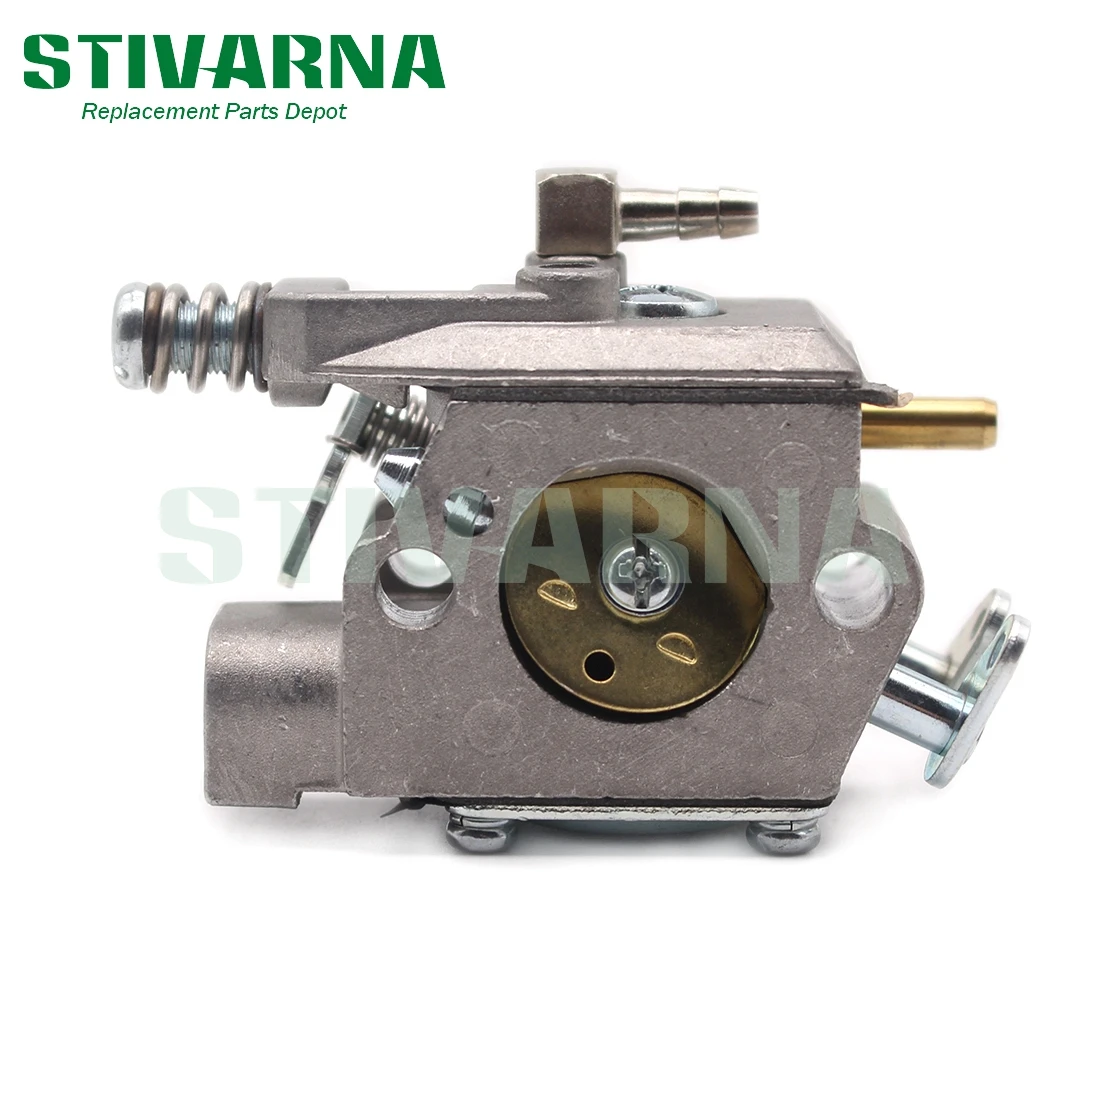 Carburetor For Echo CS-4400 Chainsaws Replace Walbro WT-416-1 12300039330 